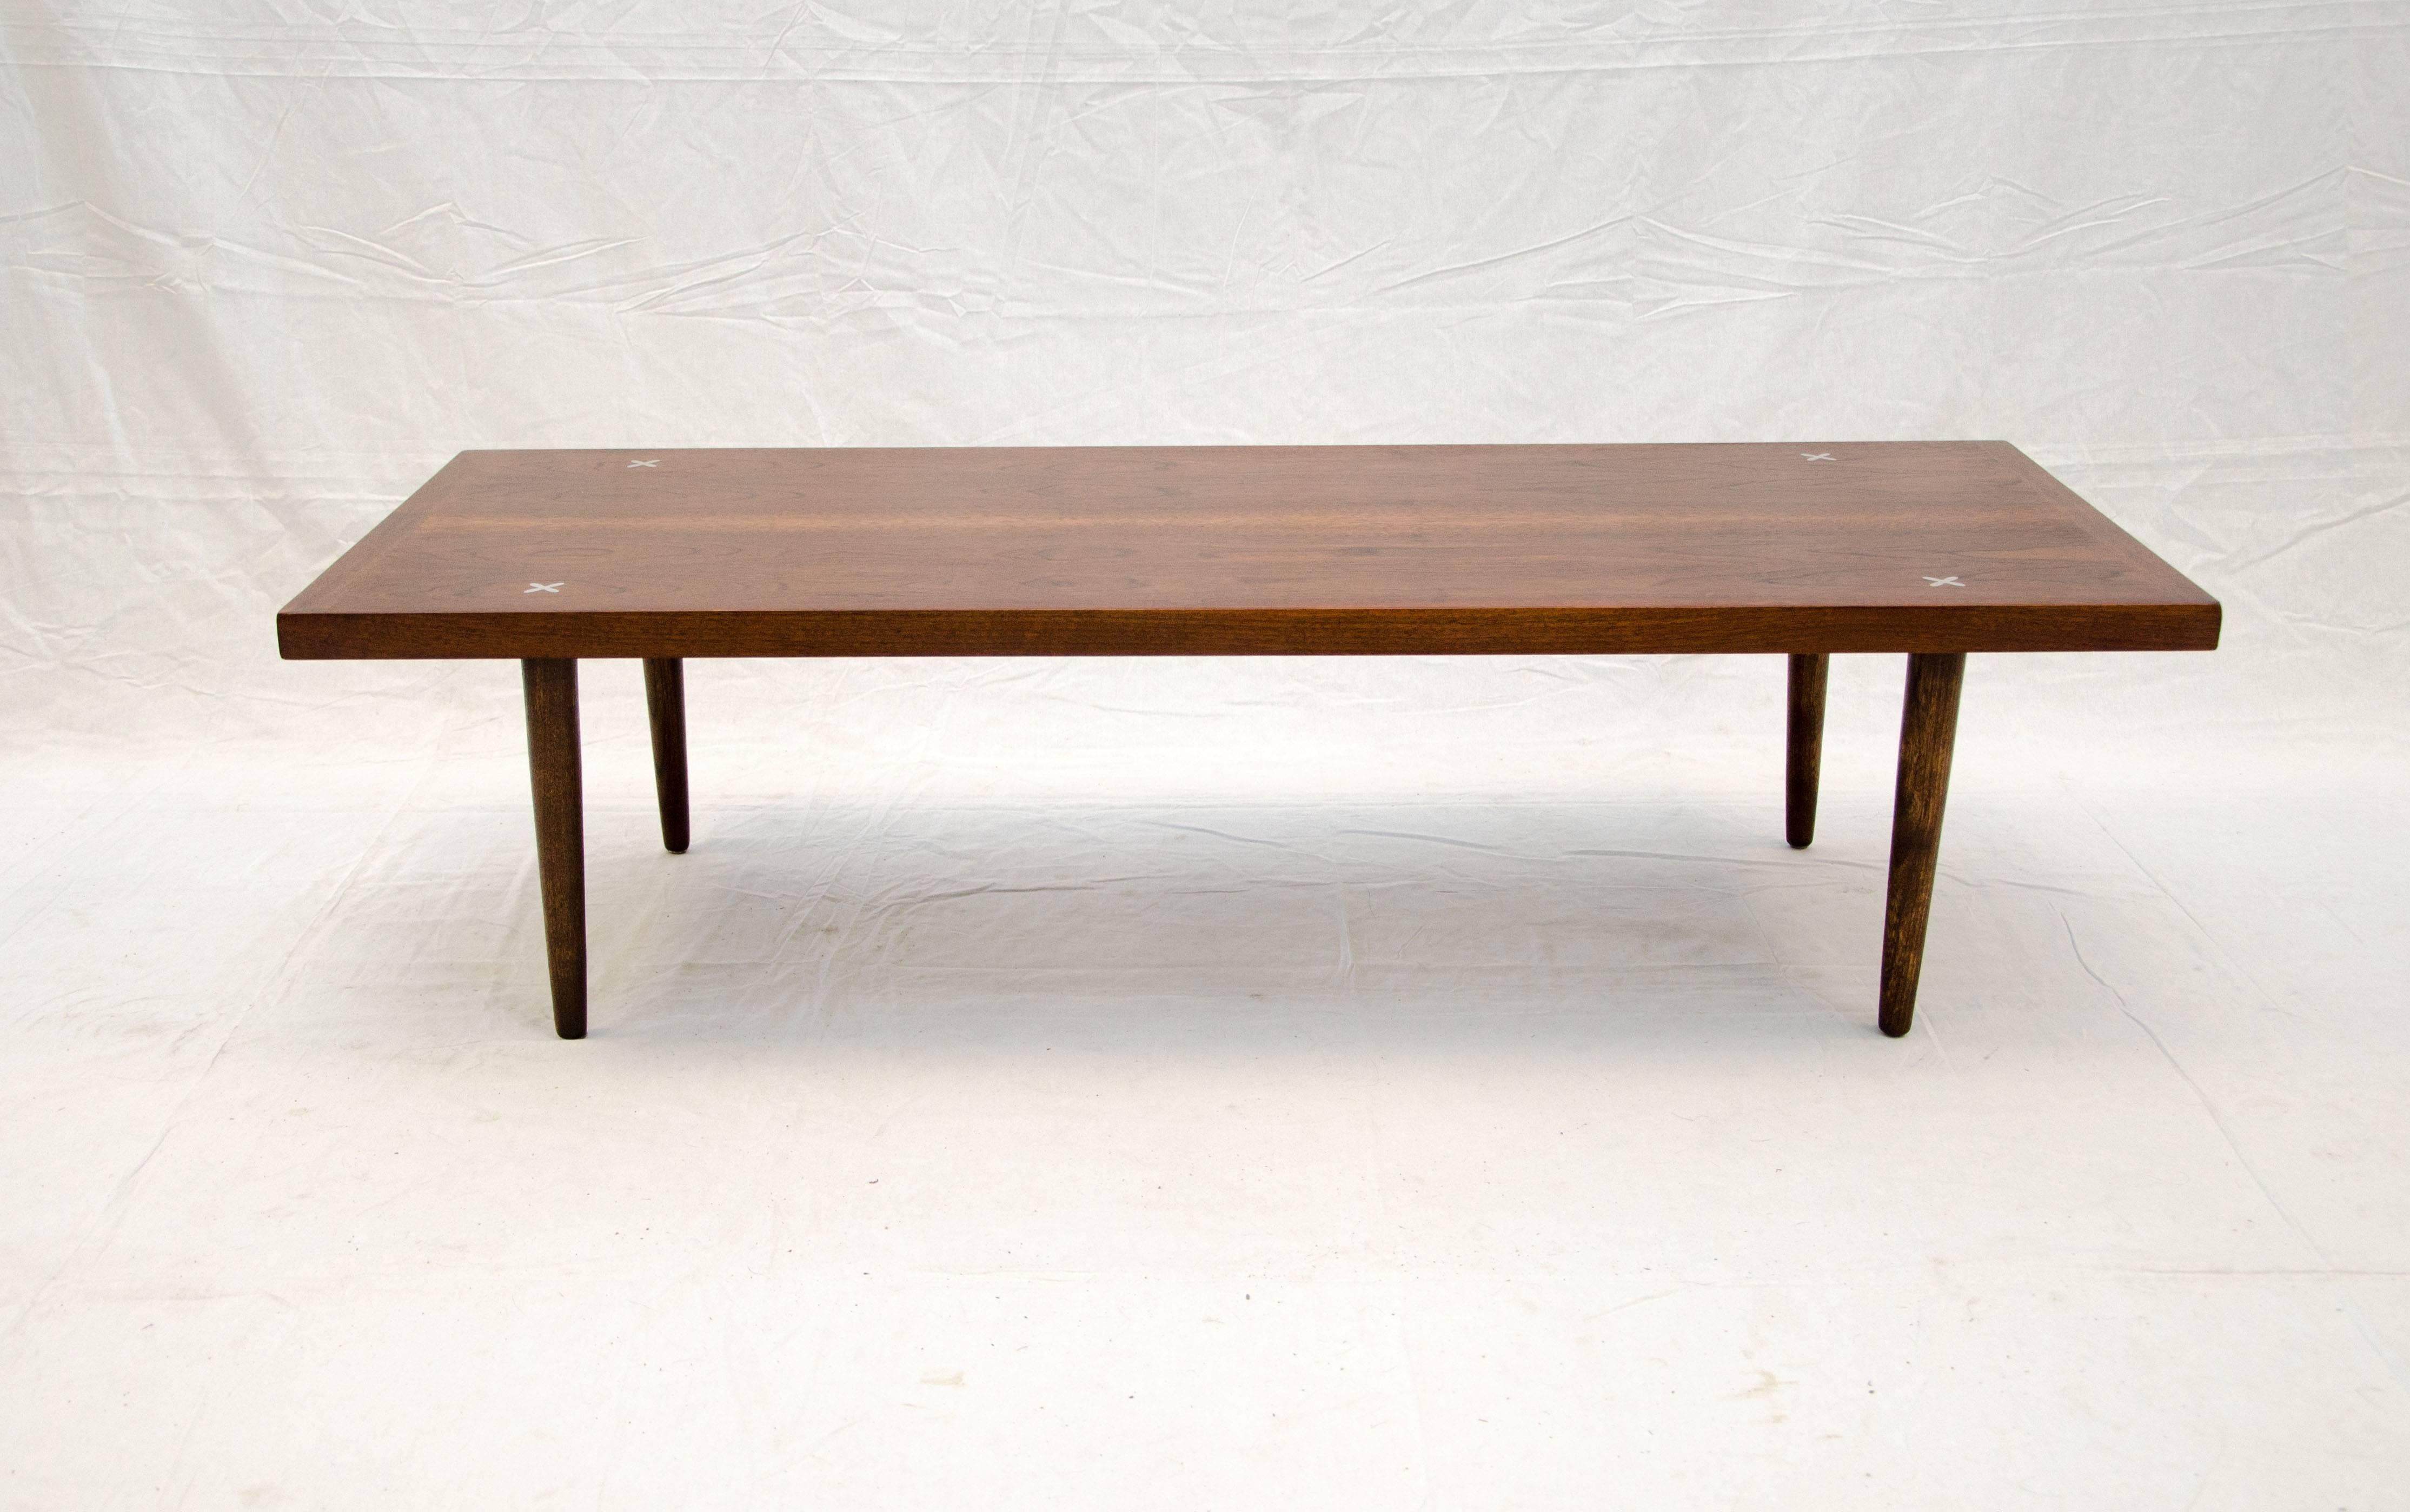 Nice medium size mid century coffee or cocktail table with the iconic American of Martinsville aluminum crosses inlaid on the corners. The table rises on round tapered legs.